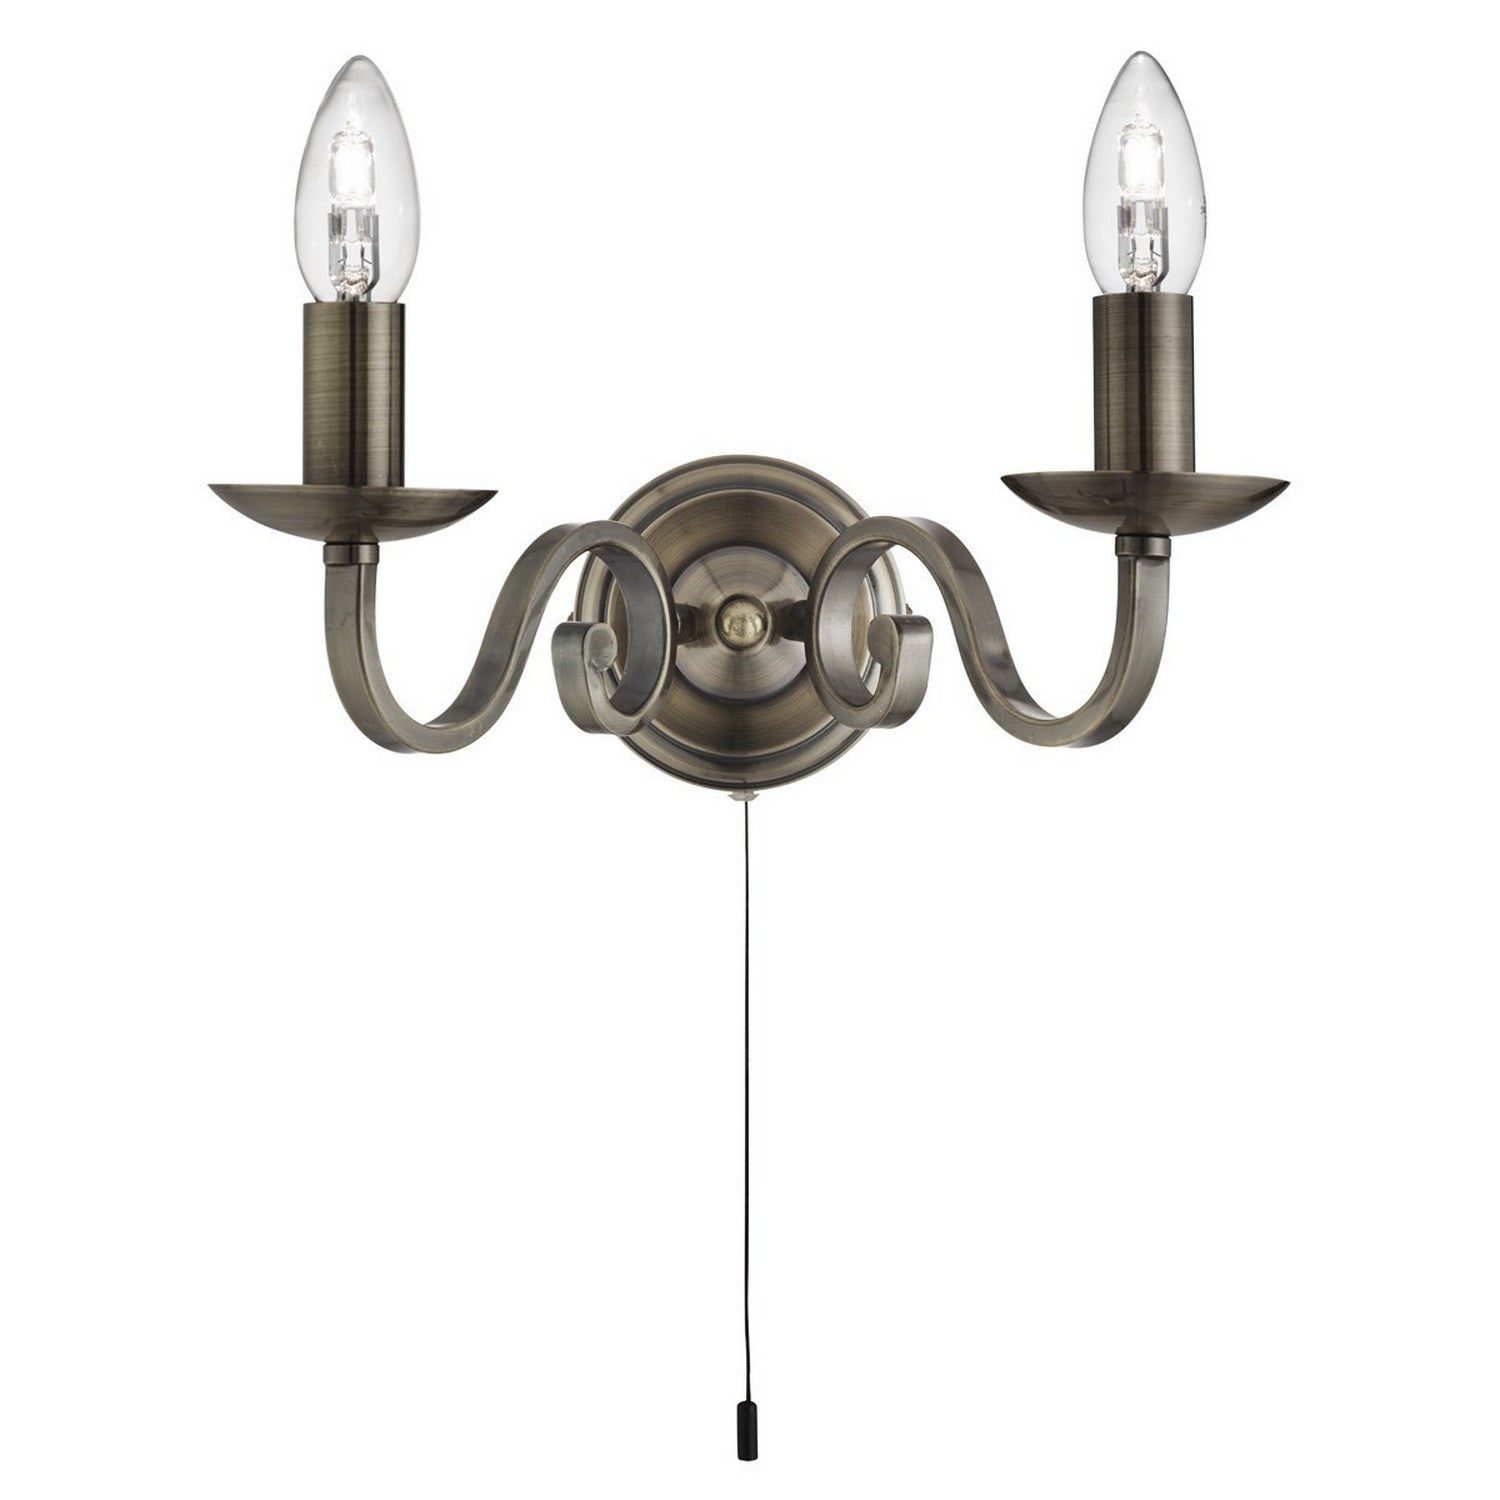 Richmond Antique Brass 2 Light Wall Bracket Fitting With Candle Style Sconces